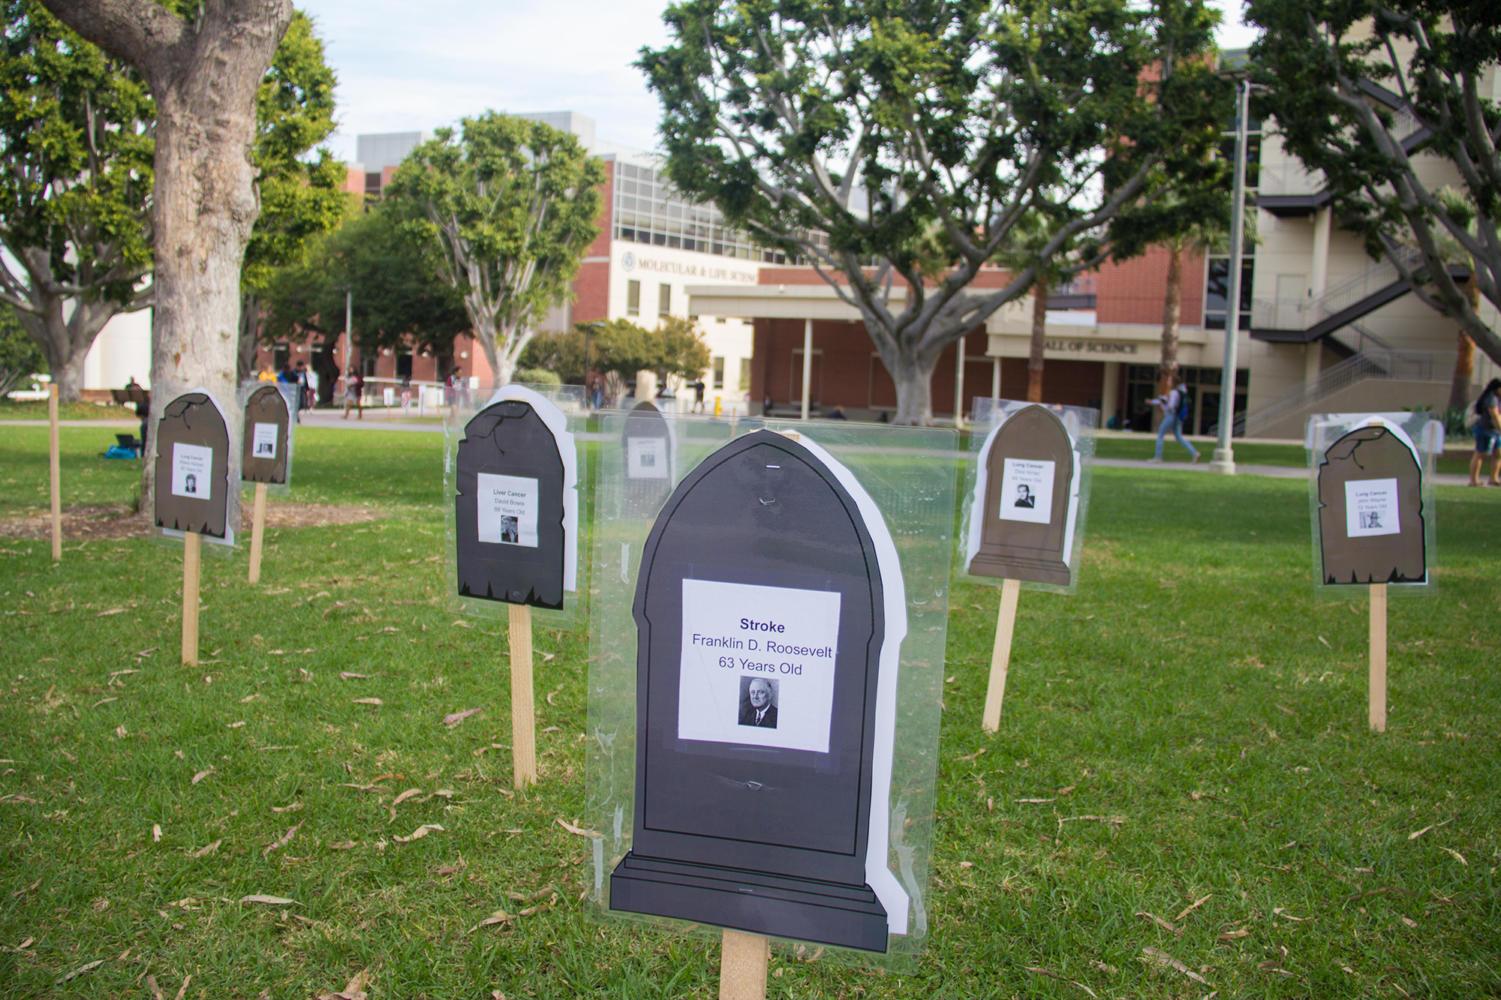 Celebrities' tombstones with smoking-related deaths were displayed on the lawn in front of the bookstore on Wednesday 11/15.